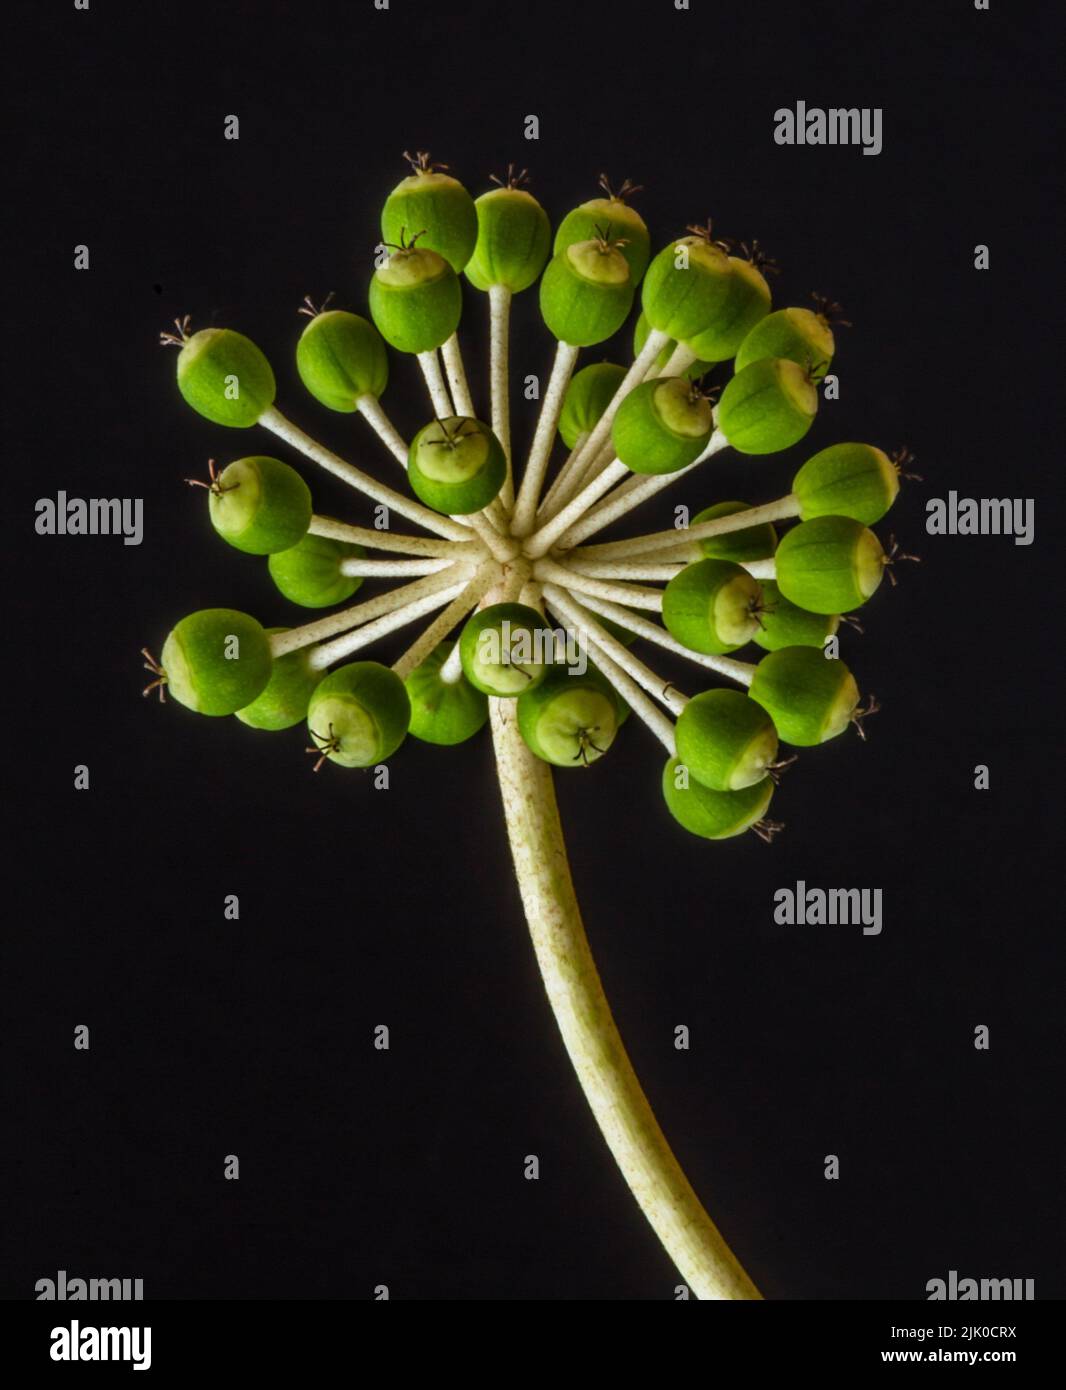 The seed pods of the castor oil plant, Ricinus communis Stock Photo